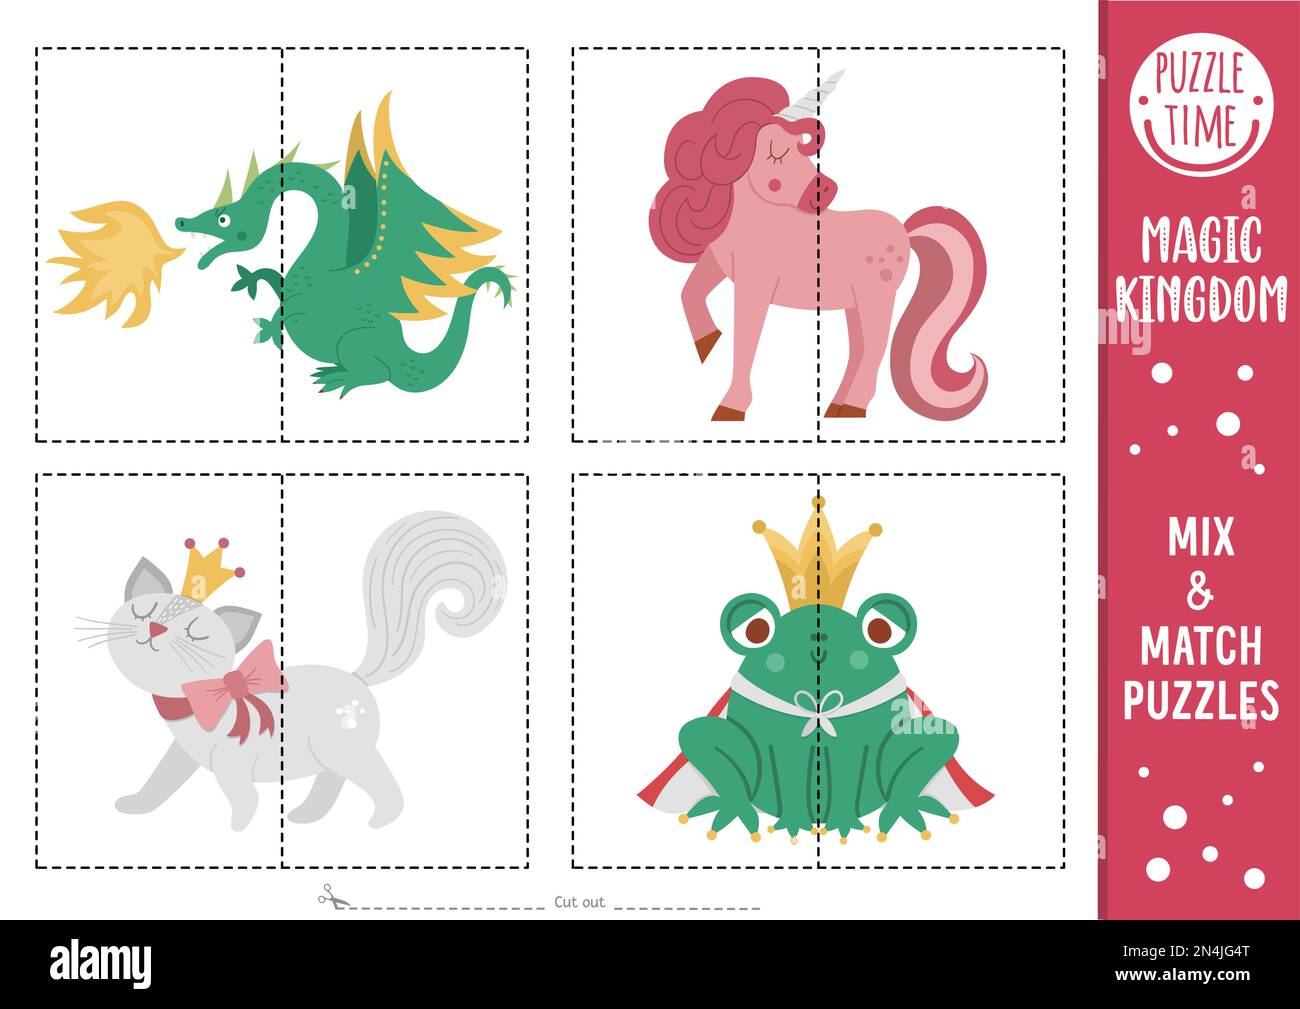 Vector fairytale mix and match puzzle with dragon, unicorn, cat in crown, frog prince. Matching magic kingdom activity for preschool kids. Educational Stock Vector